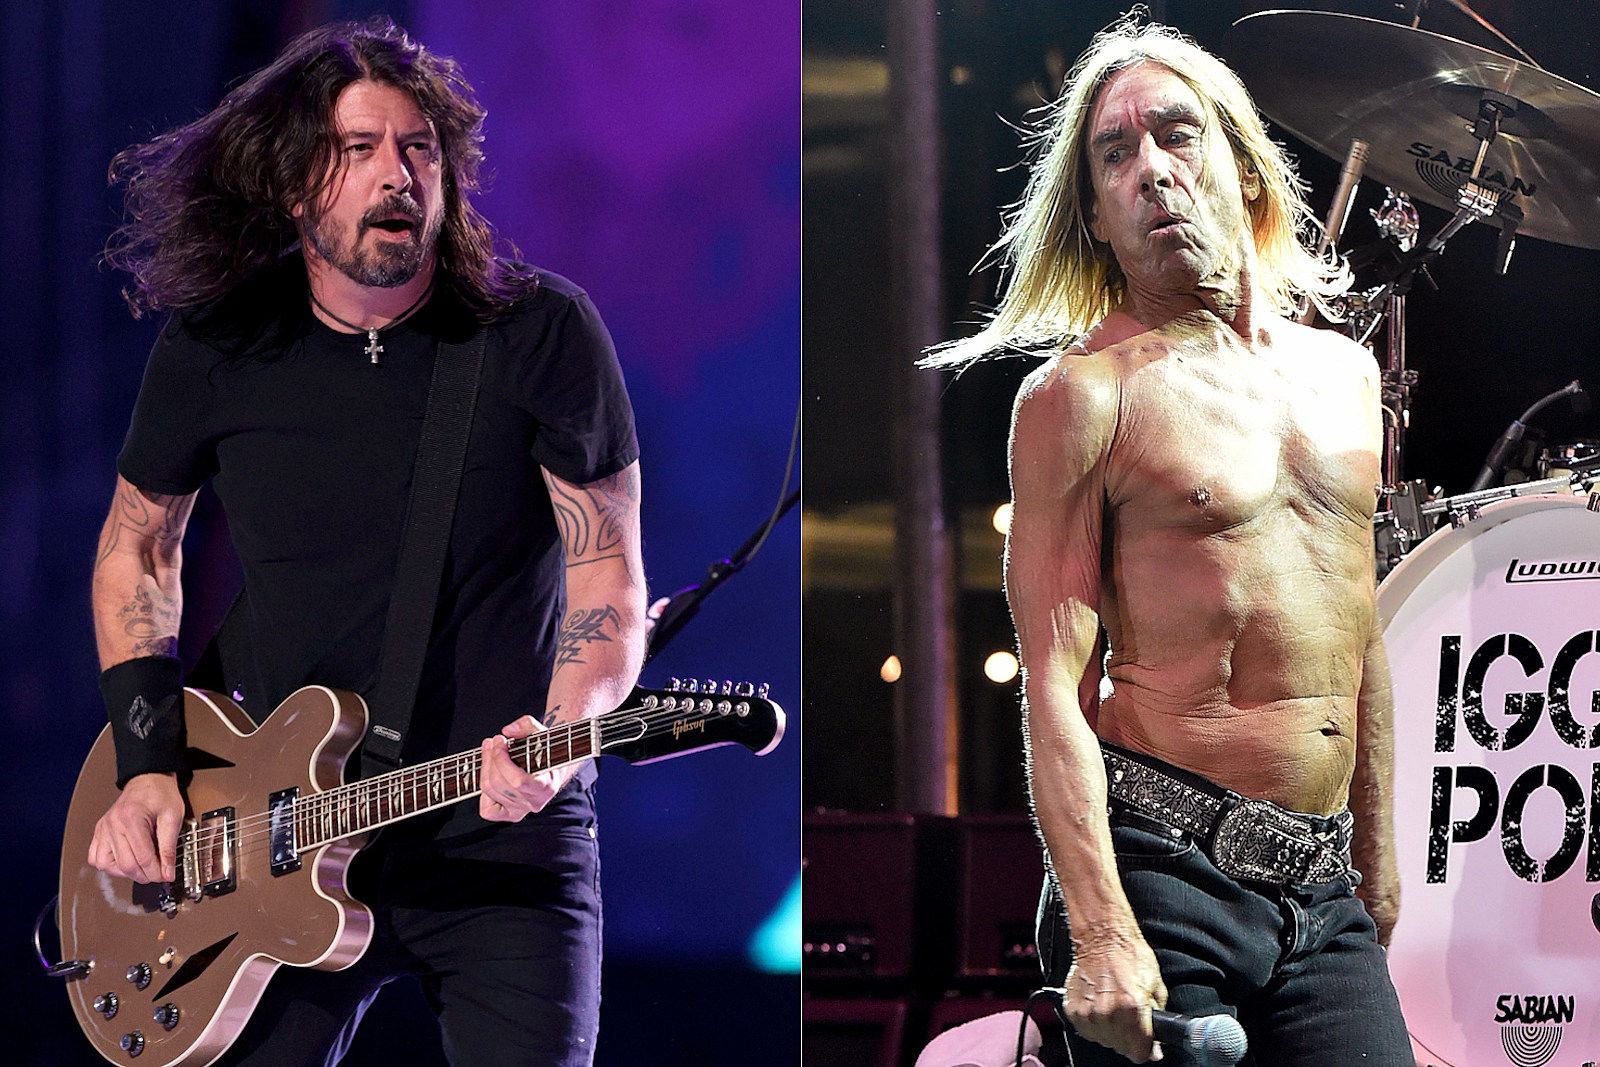 When a Pre-Fame Dave Grohl Played Drums With Iggy pic